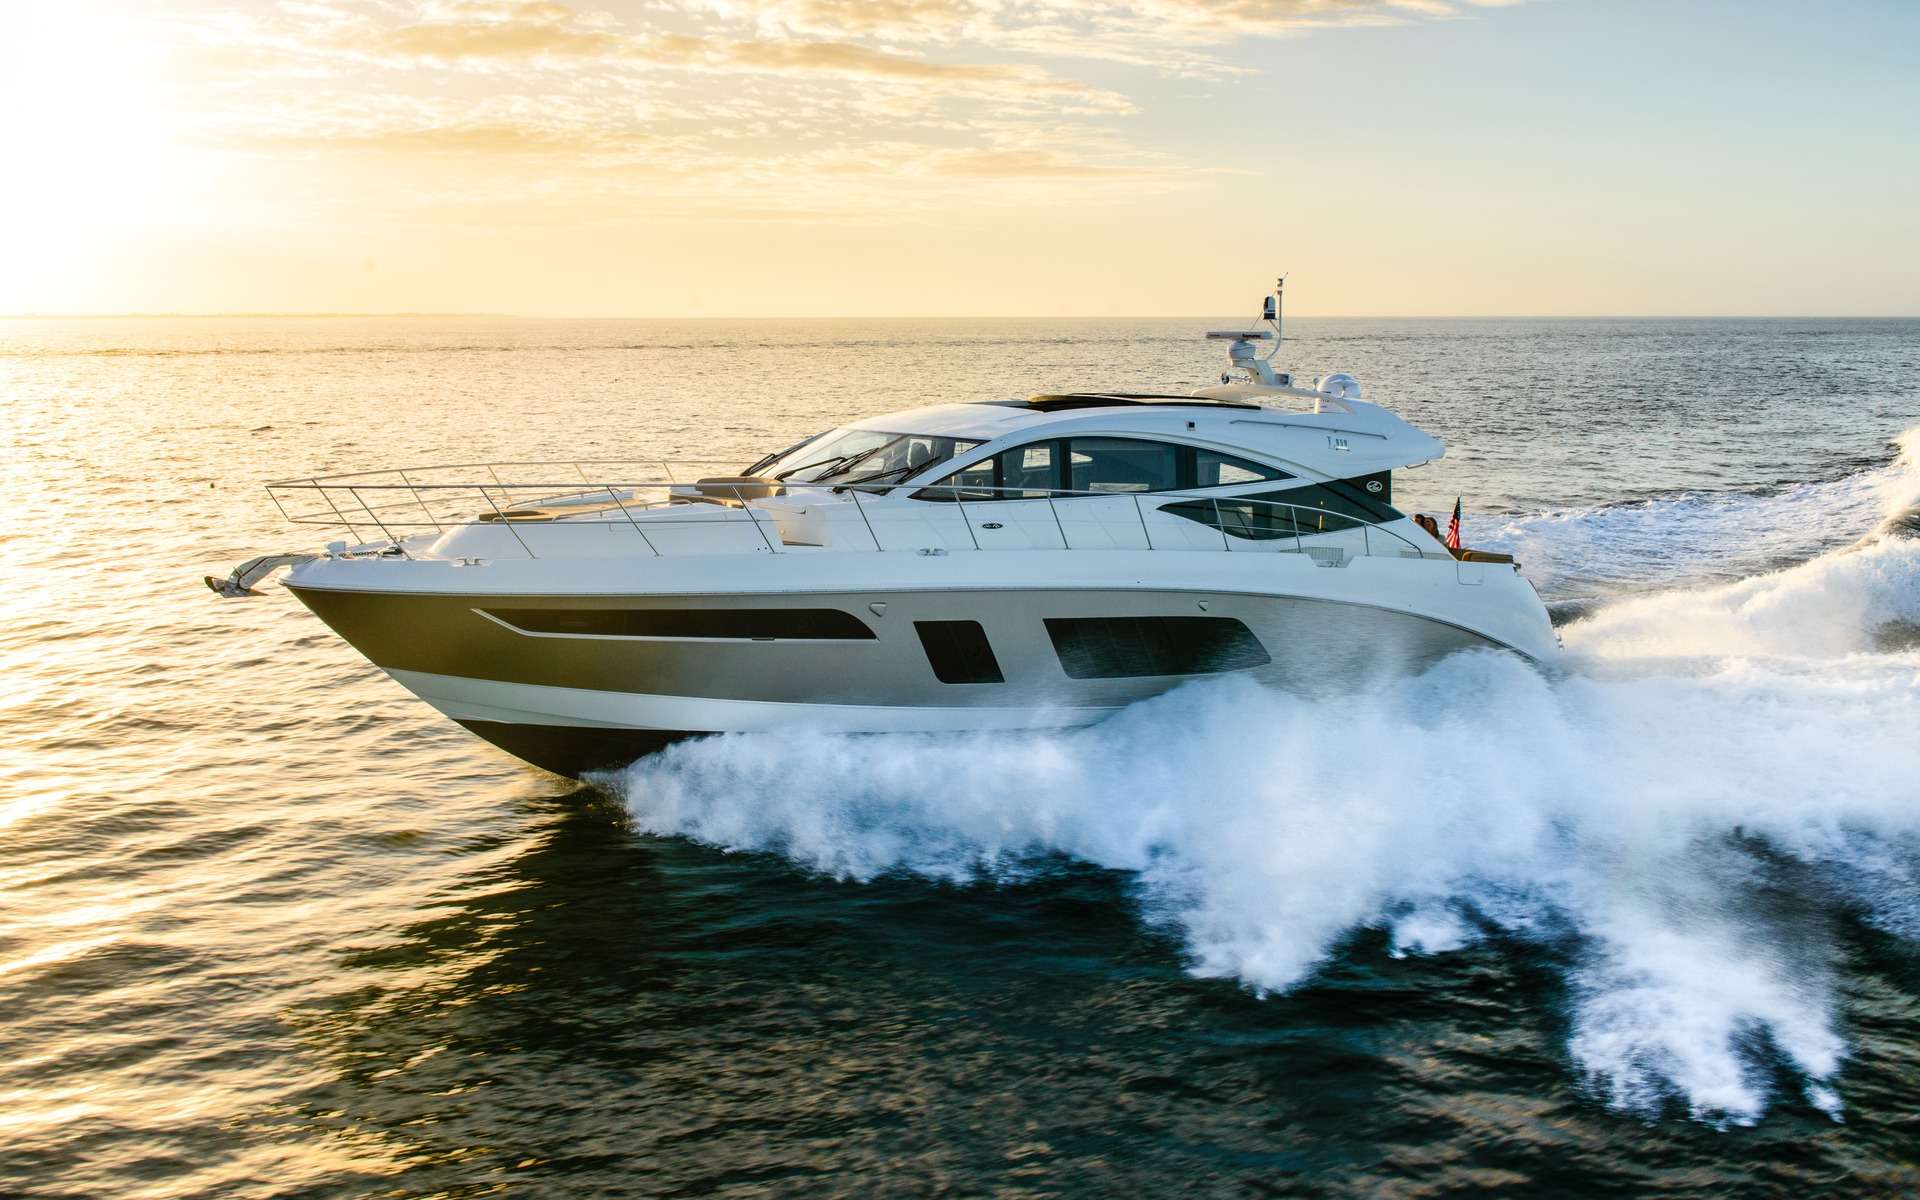 2018 Sea Ray L650 - Full technical specifications, price, engine - The Boat  Guide